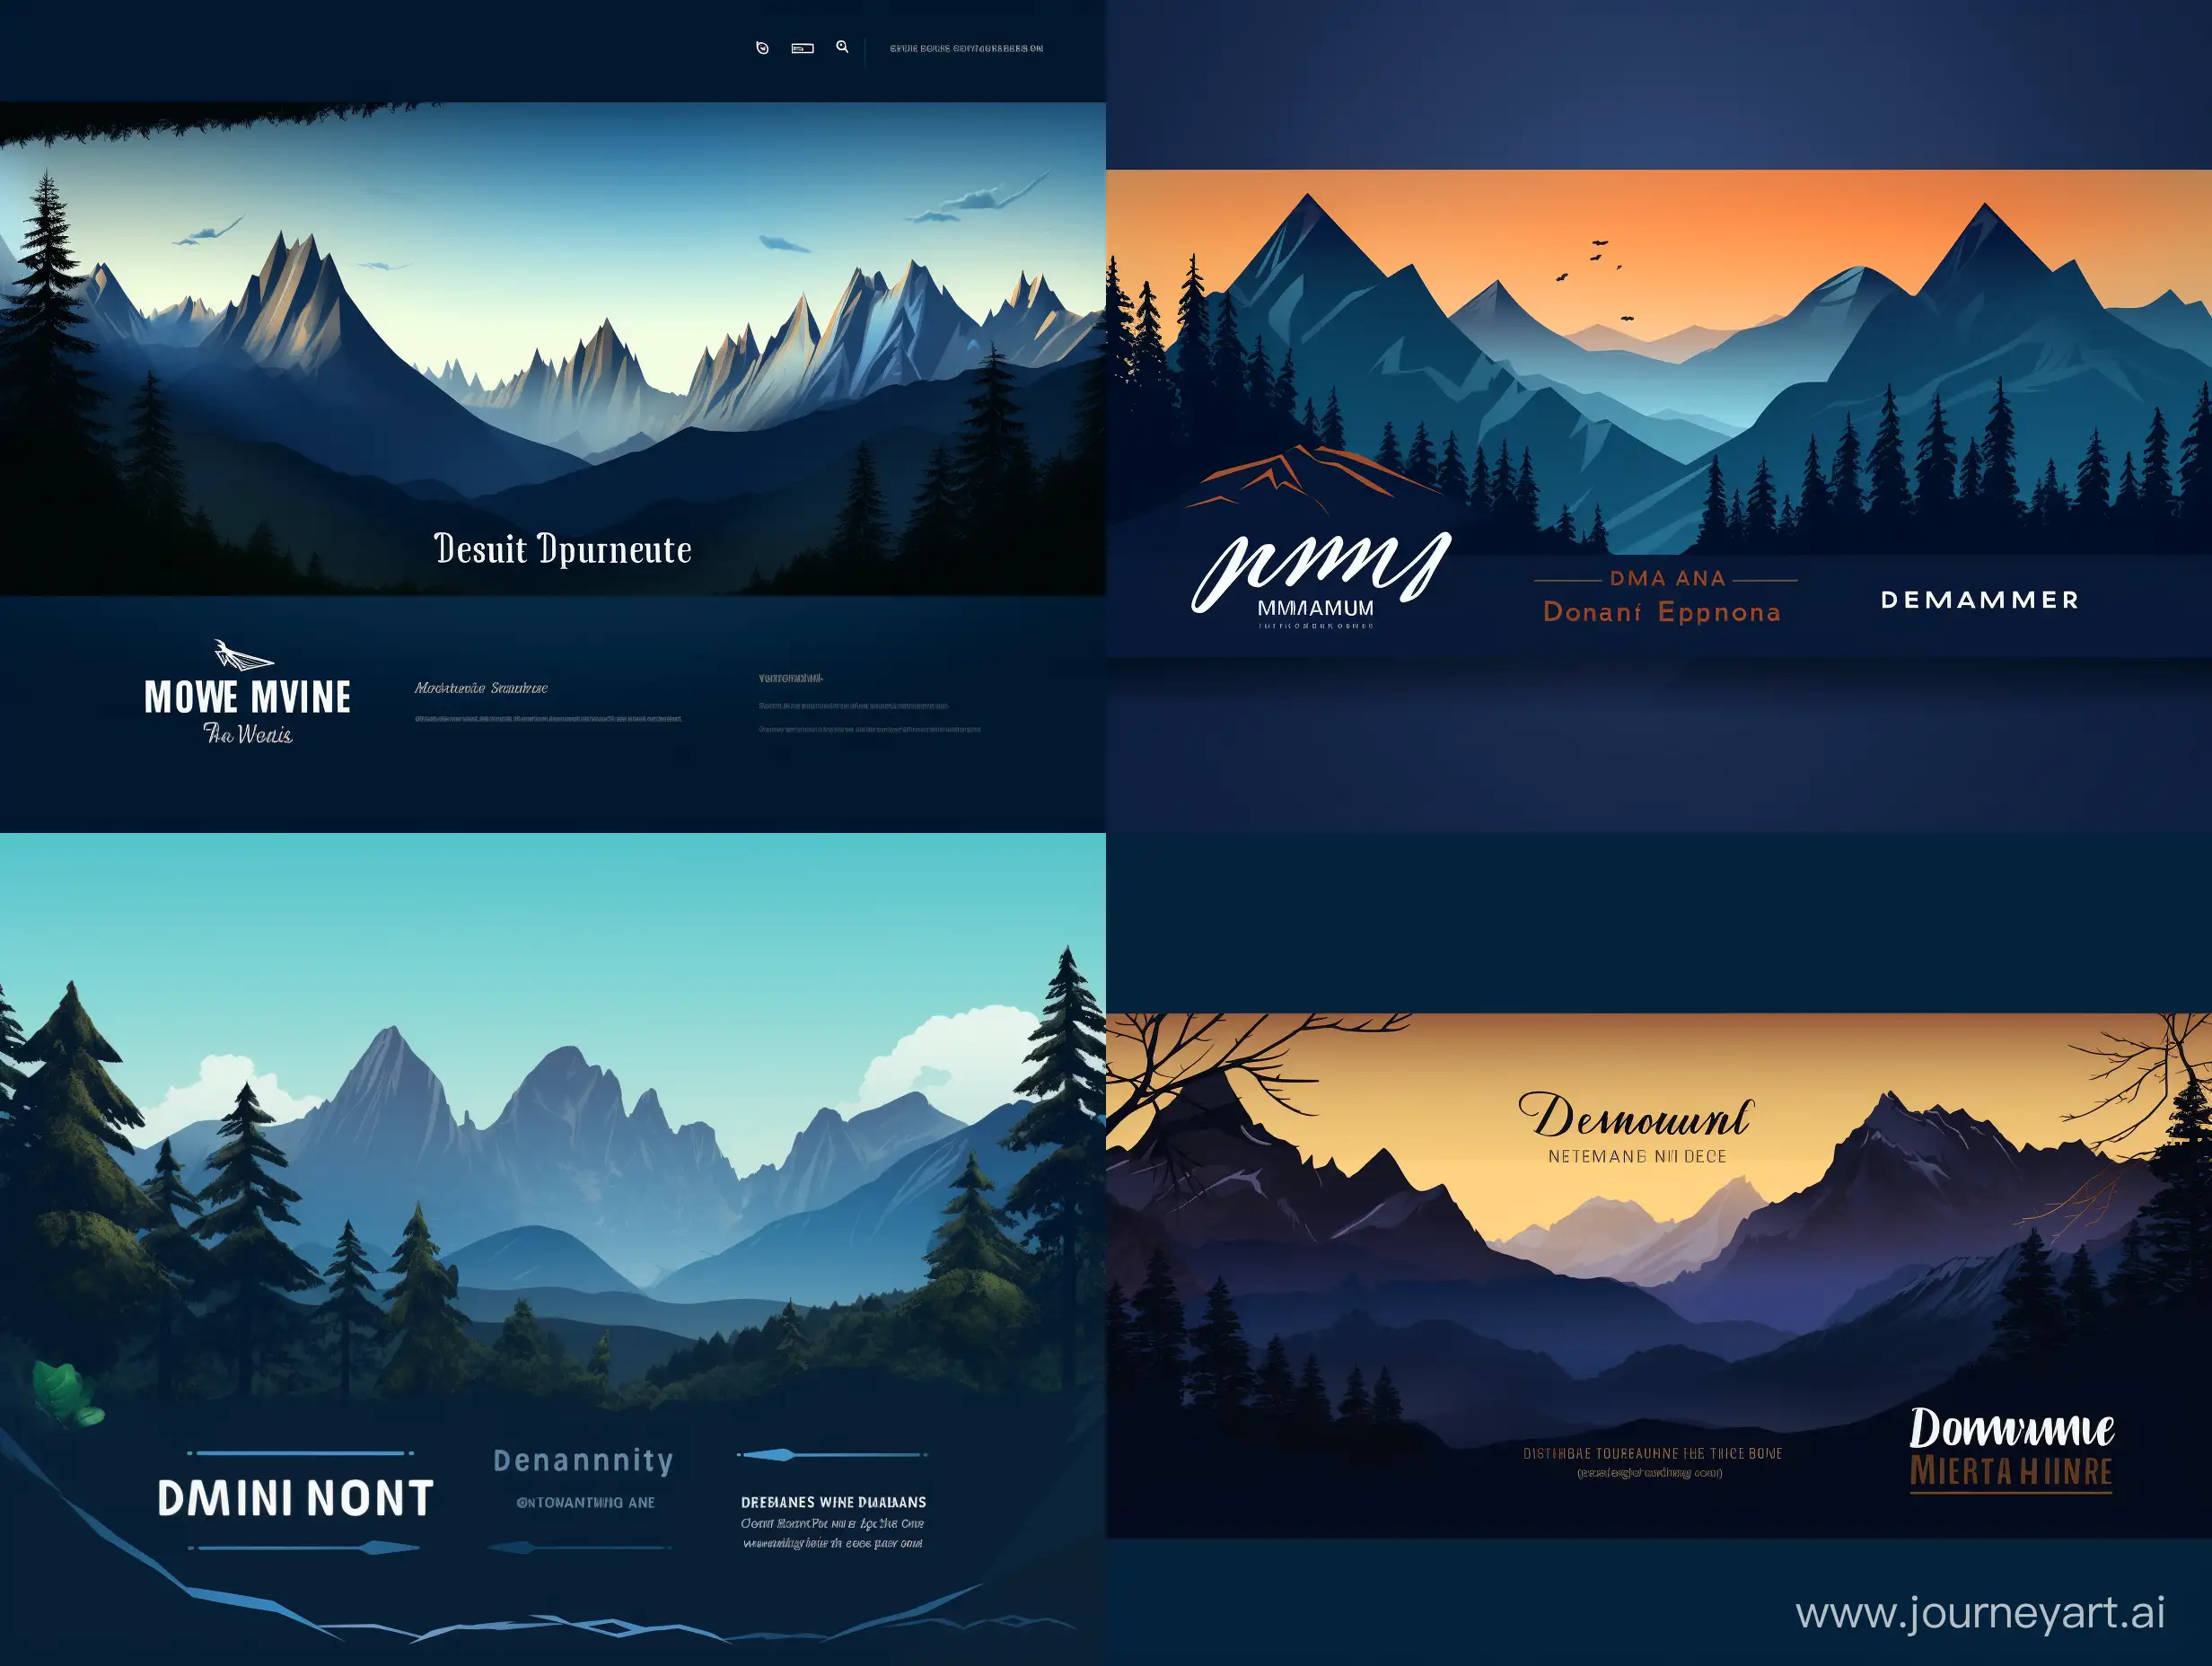 Generate a dynamic and visually appealing YouTube channel banner that incorporates elements of nature, contrasting colors, and modern design aesthetics. The banner should have the following features:  A dark blue background with a subtle gradient effect that creates a sense of depth and drama. A silhouette of a forest with mountains in the background that adds a touch of nature and adventure. The mountains should be illuminated with red hues that suggest either sunrise or sunset and contrast with the blue background. A circular design element in the center where the profile picture is supposed to be placed. The circle should have dark shades that blend into the forest silhouette and create a focal point for the viewer’s attention. 